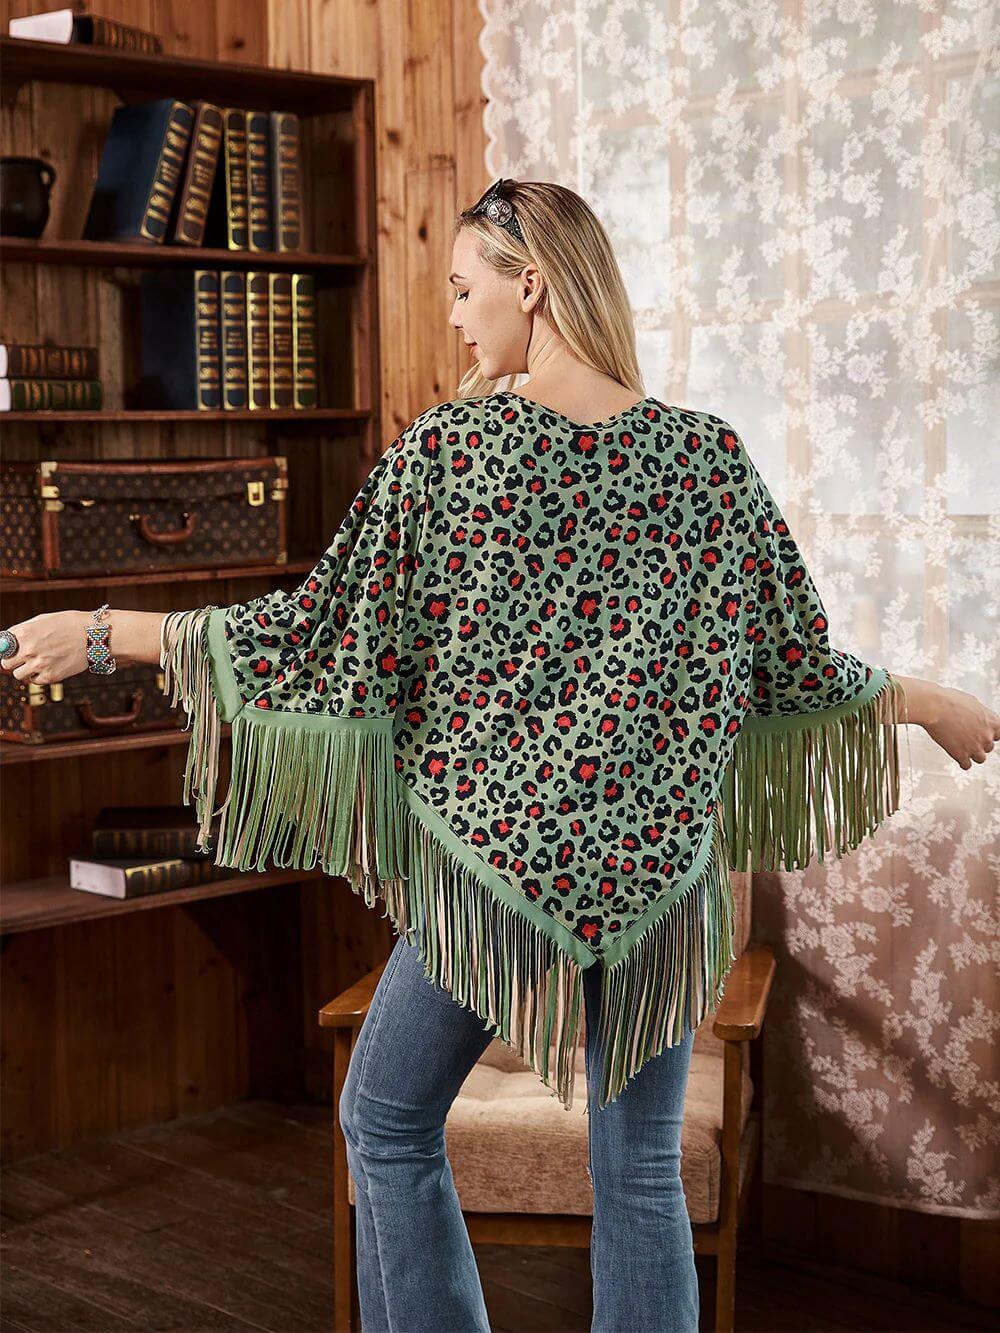 Montana-West-American-Bling-Turquoise-Leopard-Fringe-Poncho-Turquoise-PCH-1739-TQ-2